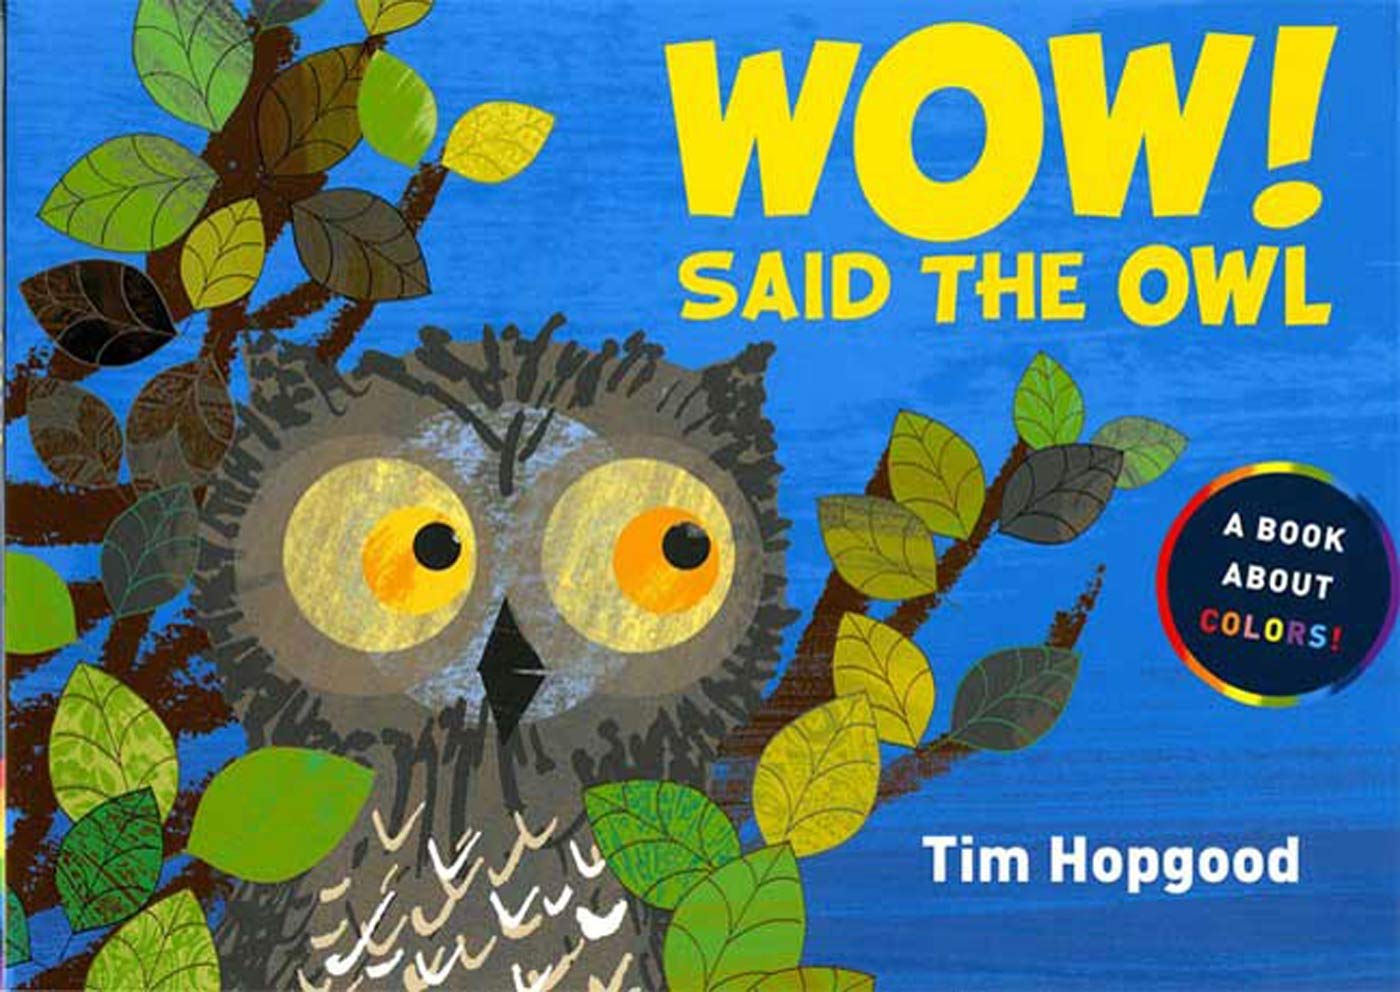 IMG : Wow! Said the Owl      Book about colours